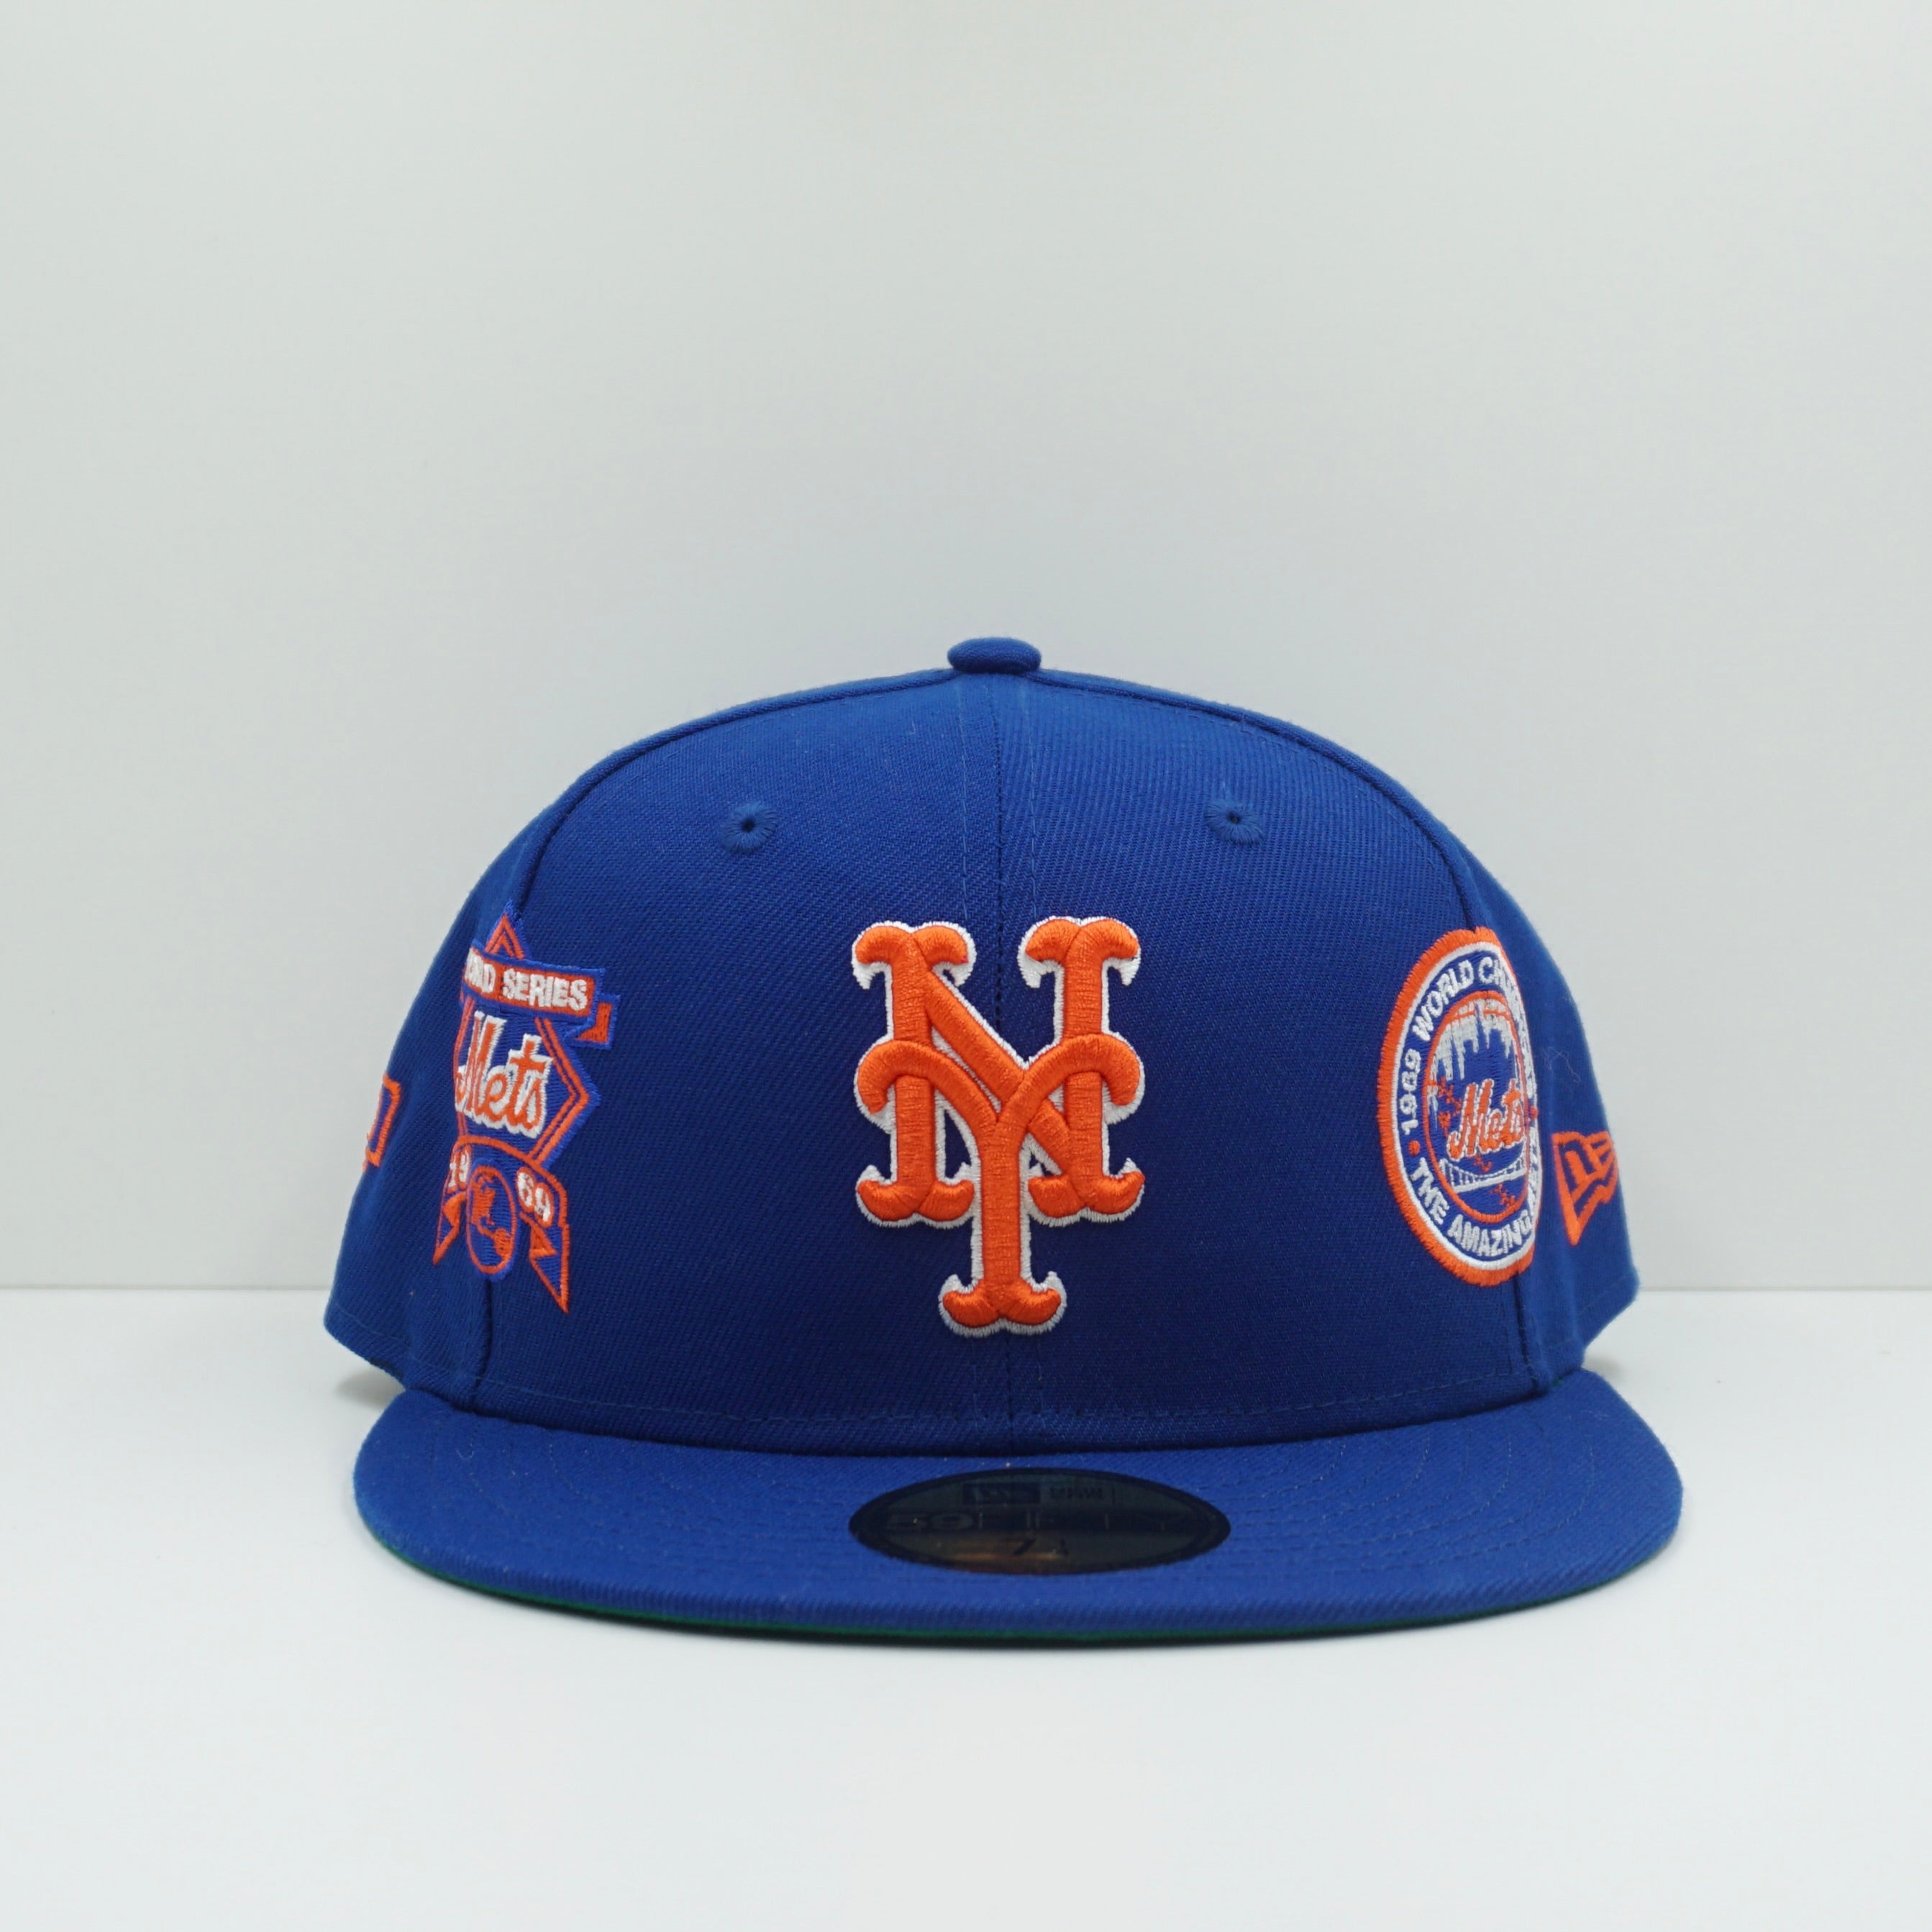 New Era Cooperstown New York Mets Multi Logo Fitted Cap